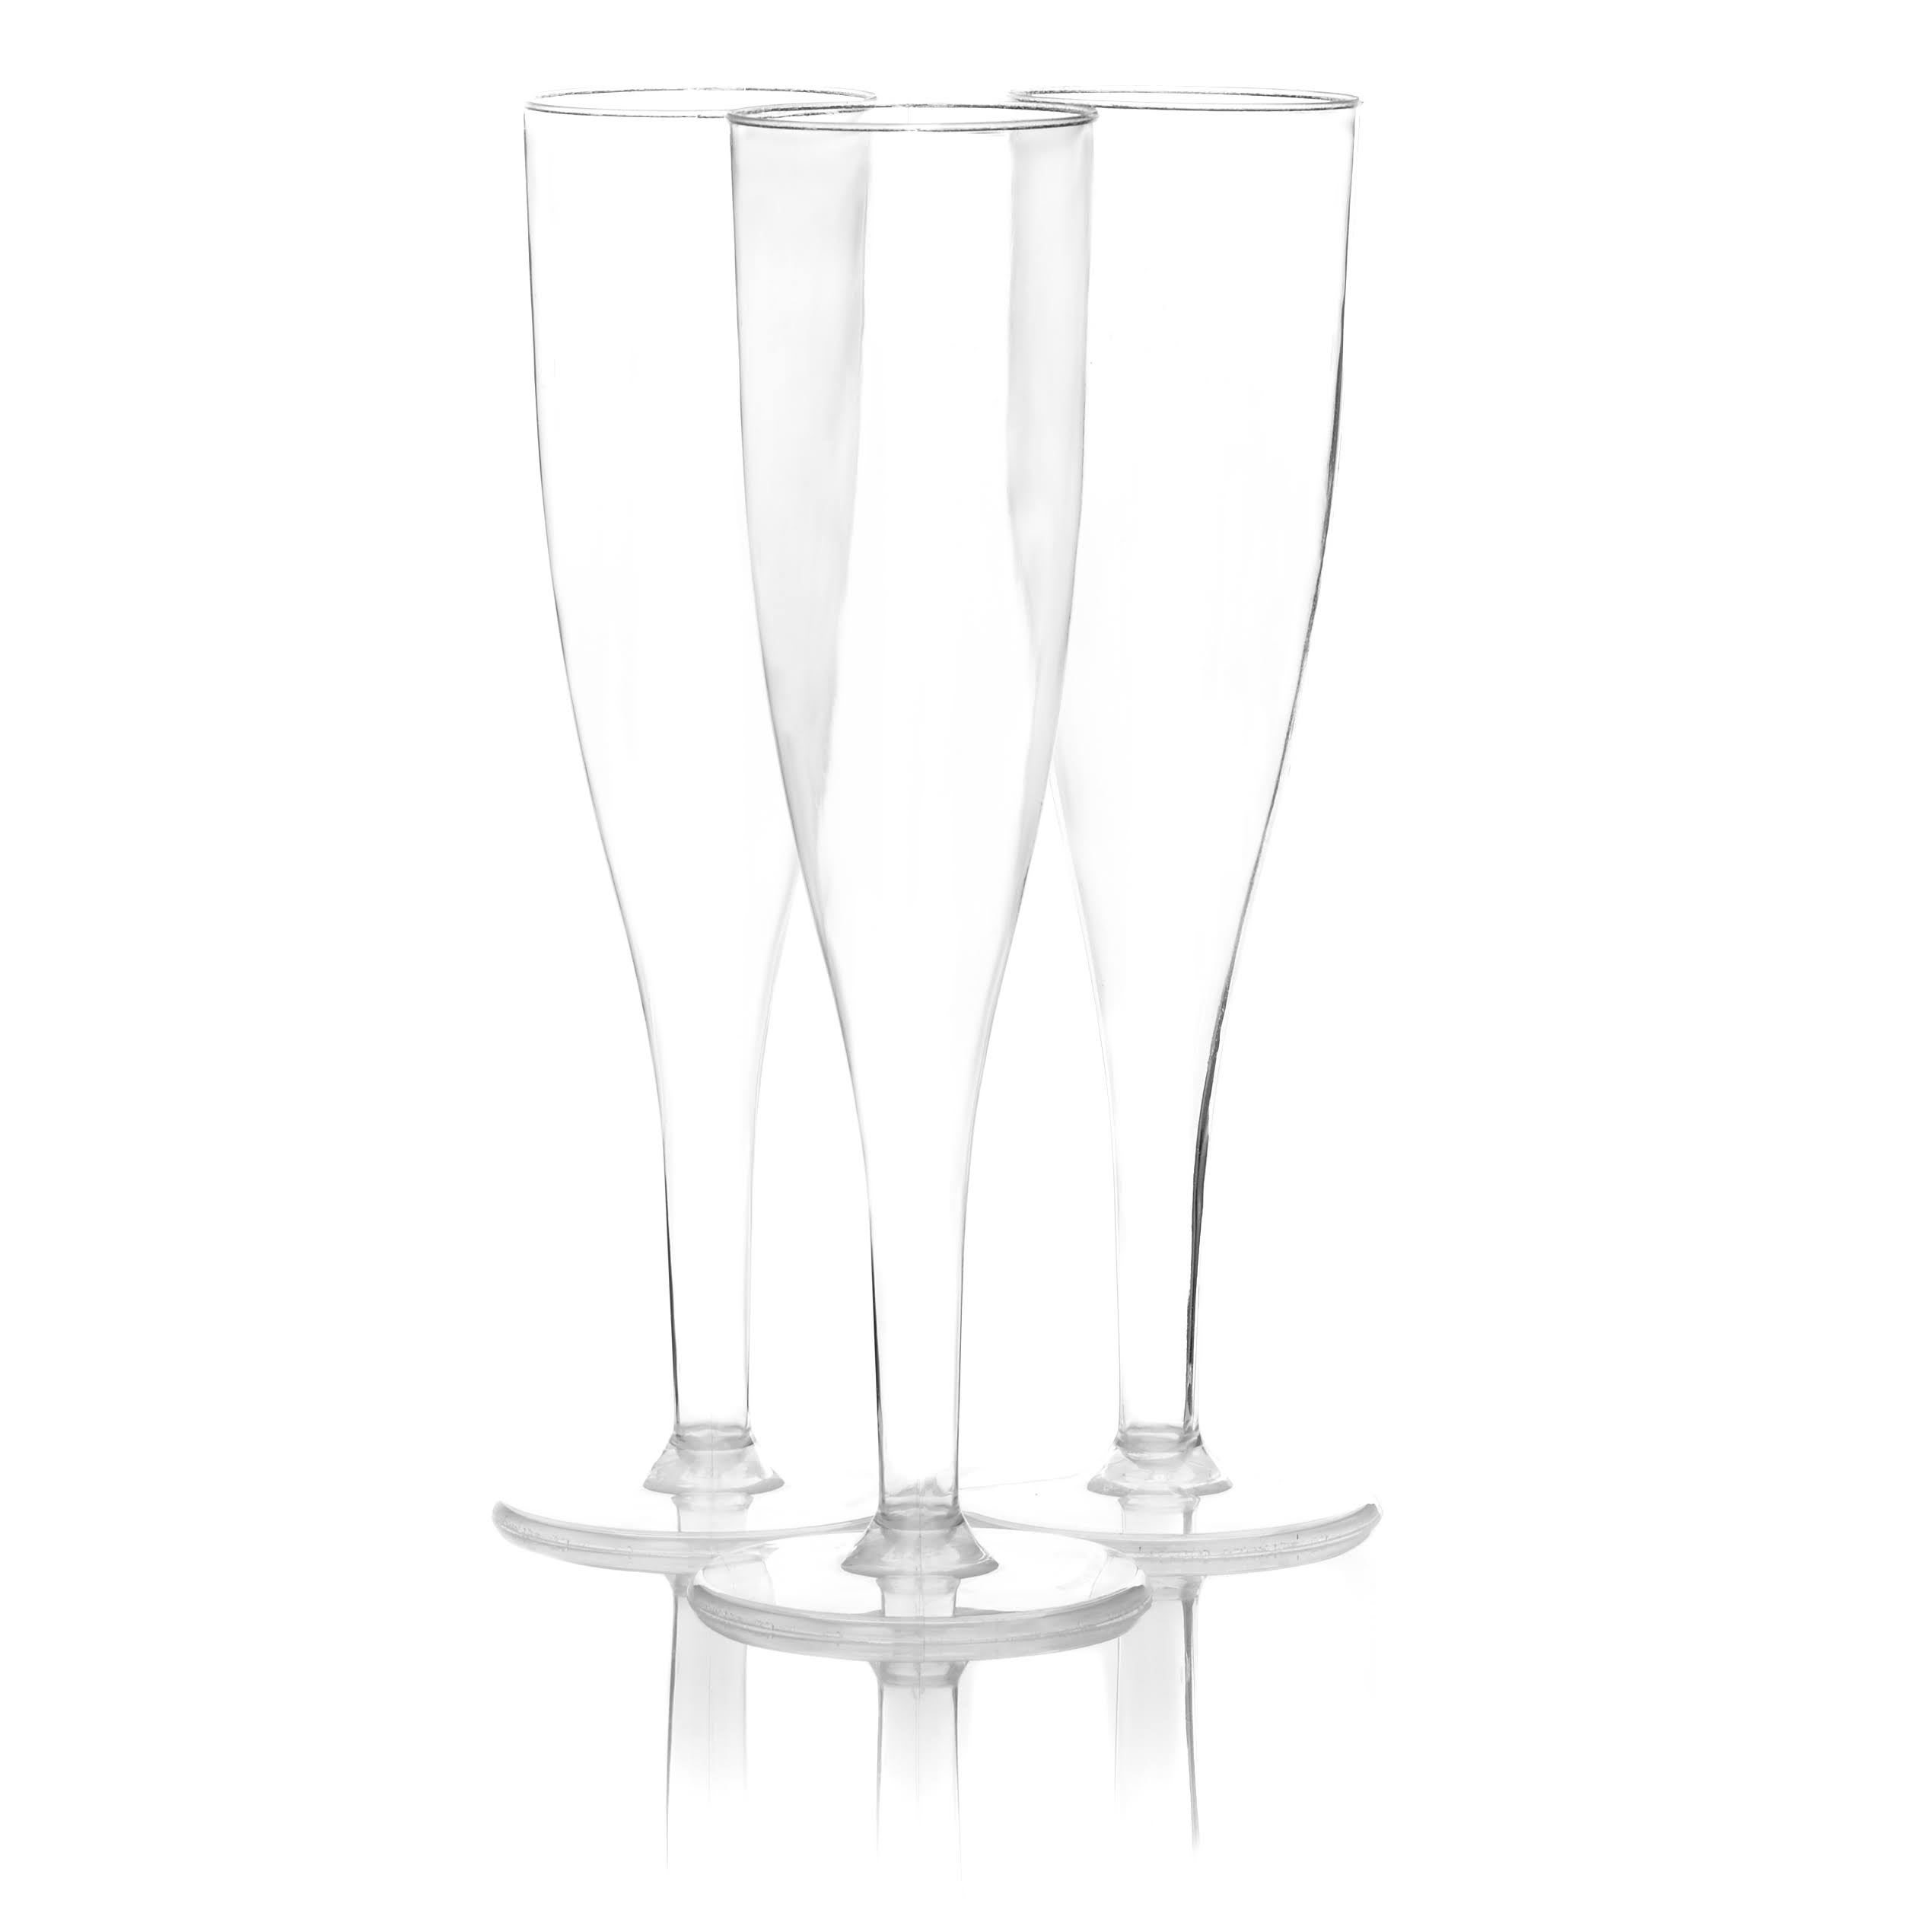 Party Essentials Hard Plastic Champagne Flutes - 10ct, Clear